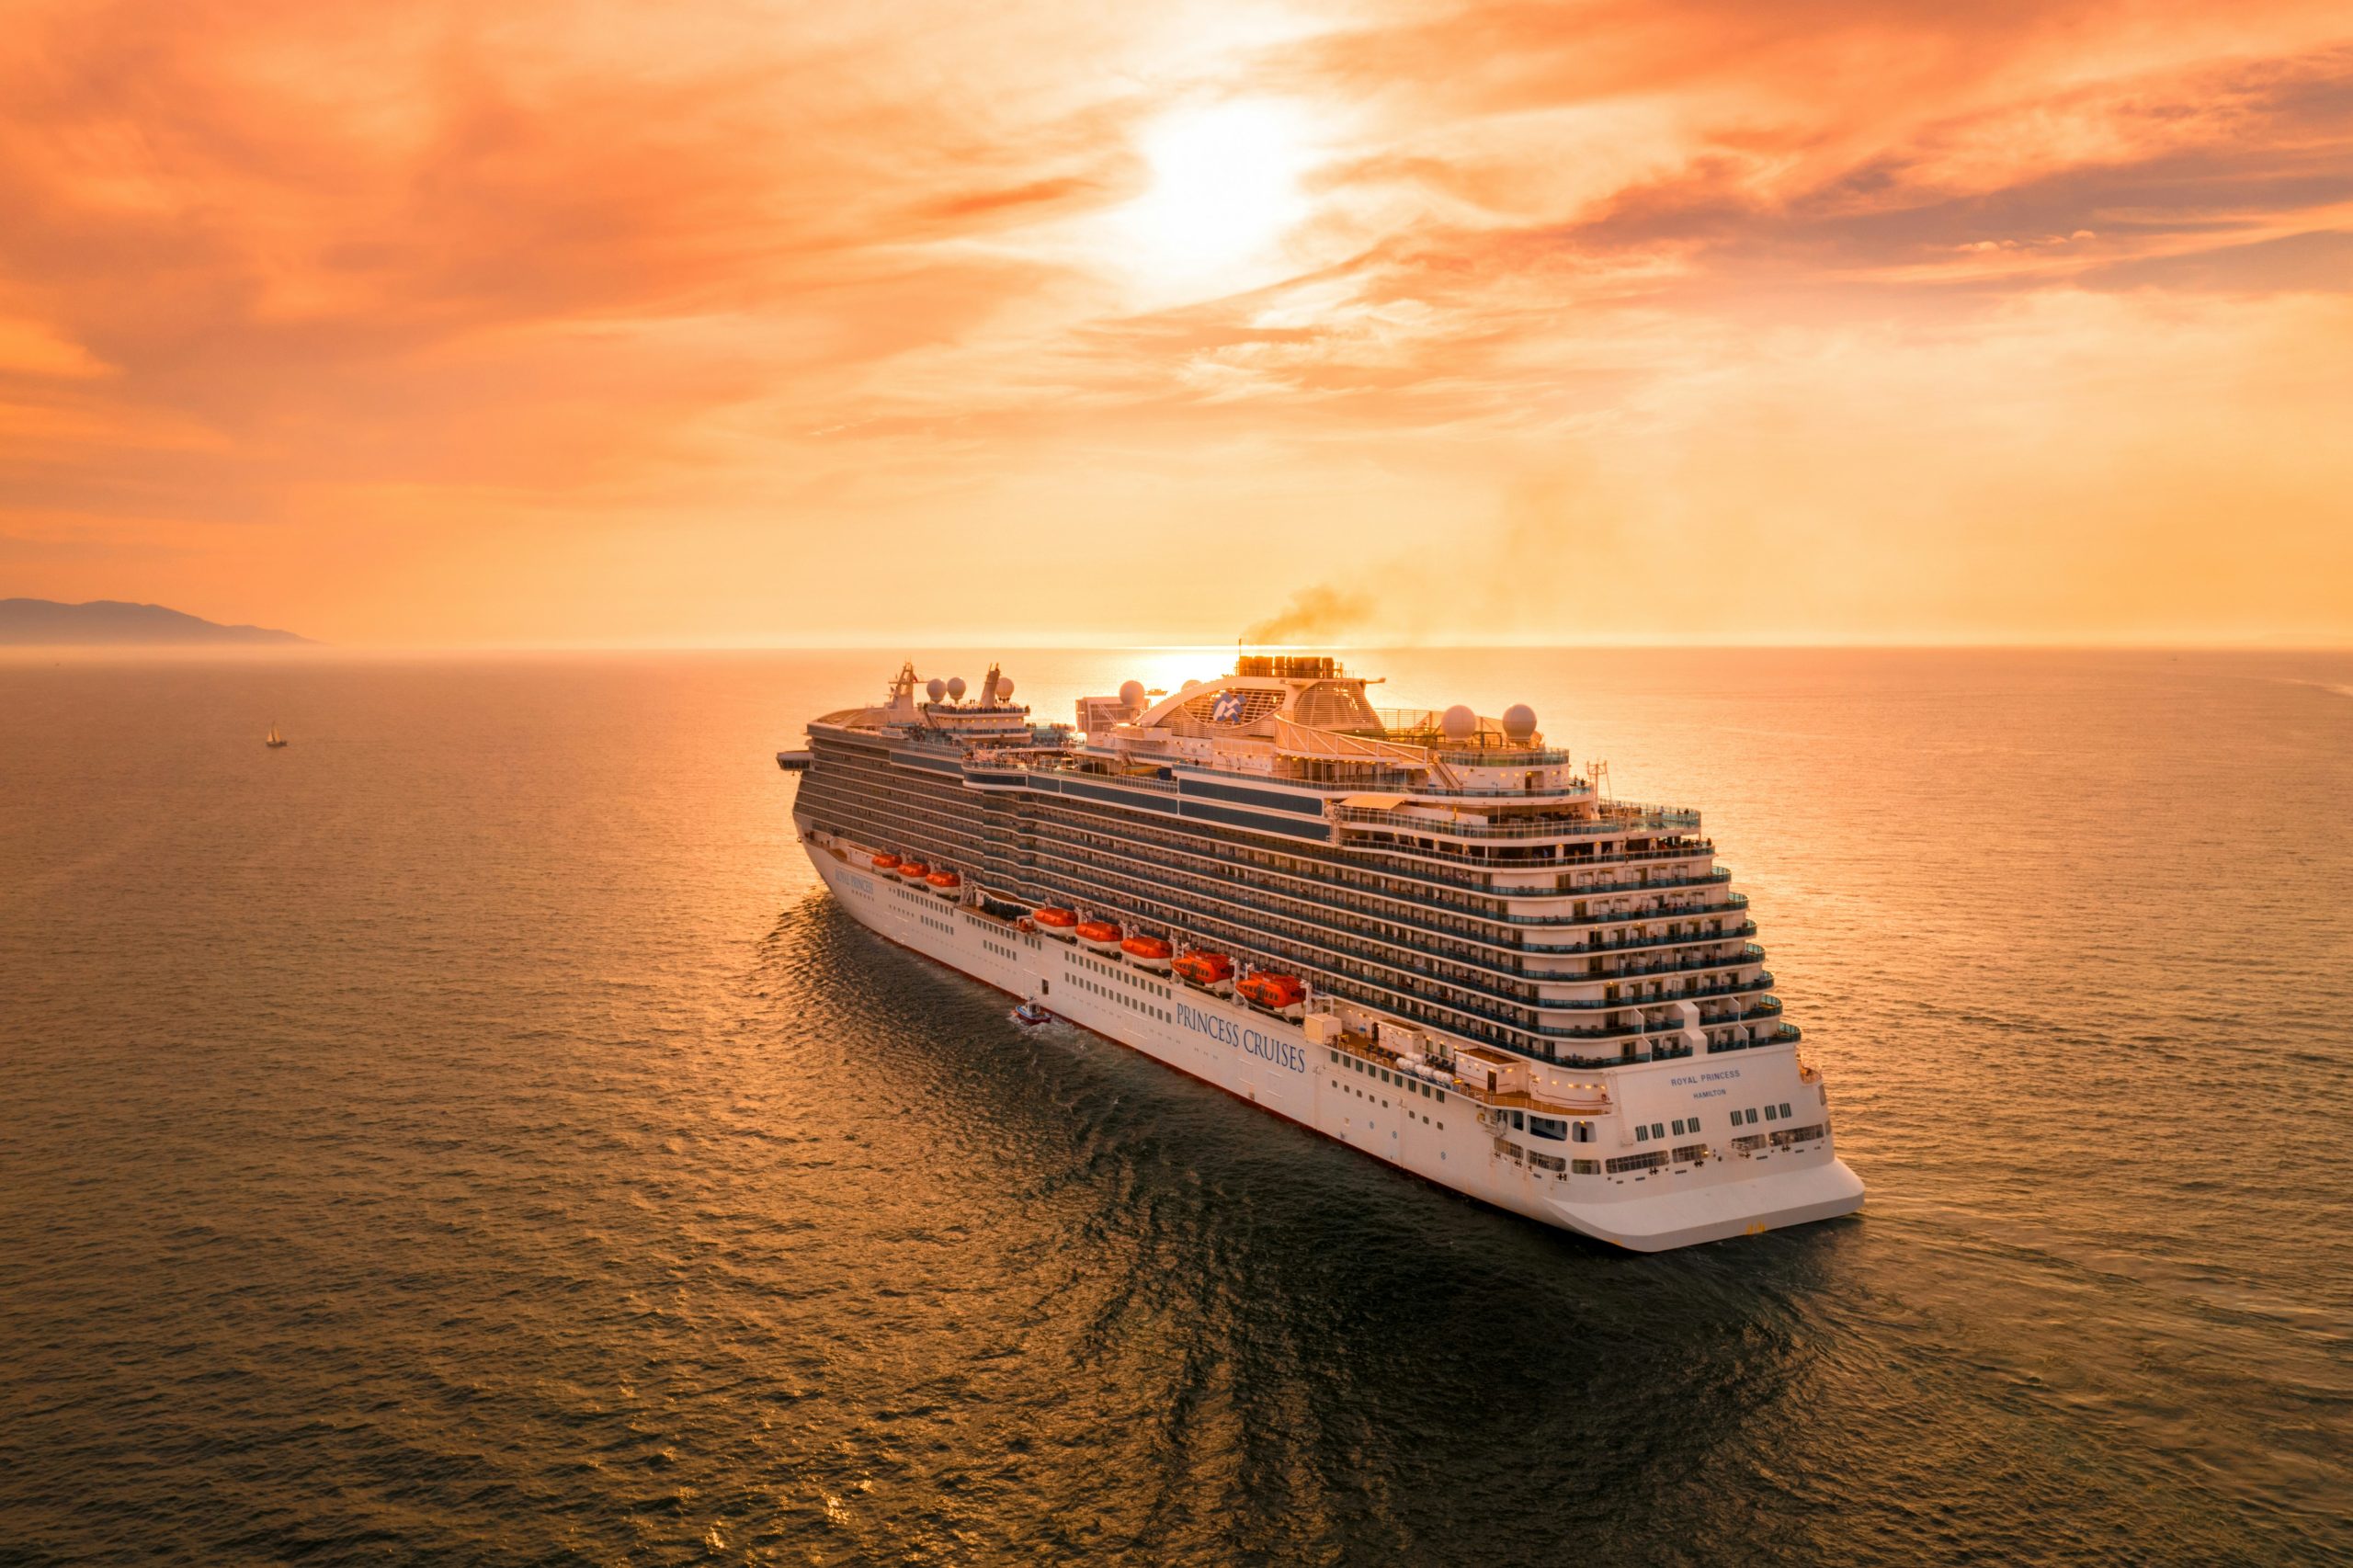 explore the world's best cruise destinations and embark on a luxurious adventure with our exclusive cruise experiences. book now and set sail for an unforgettable voyage!